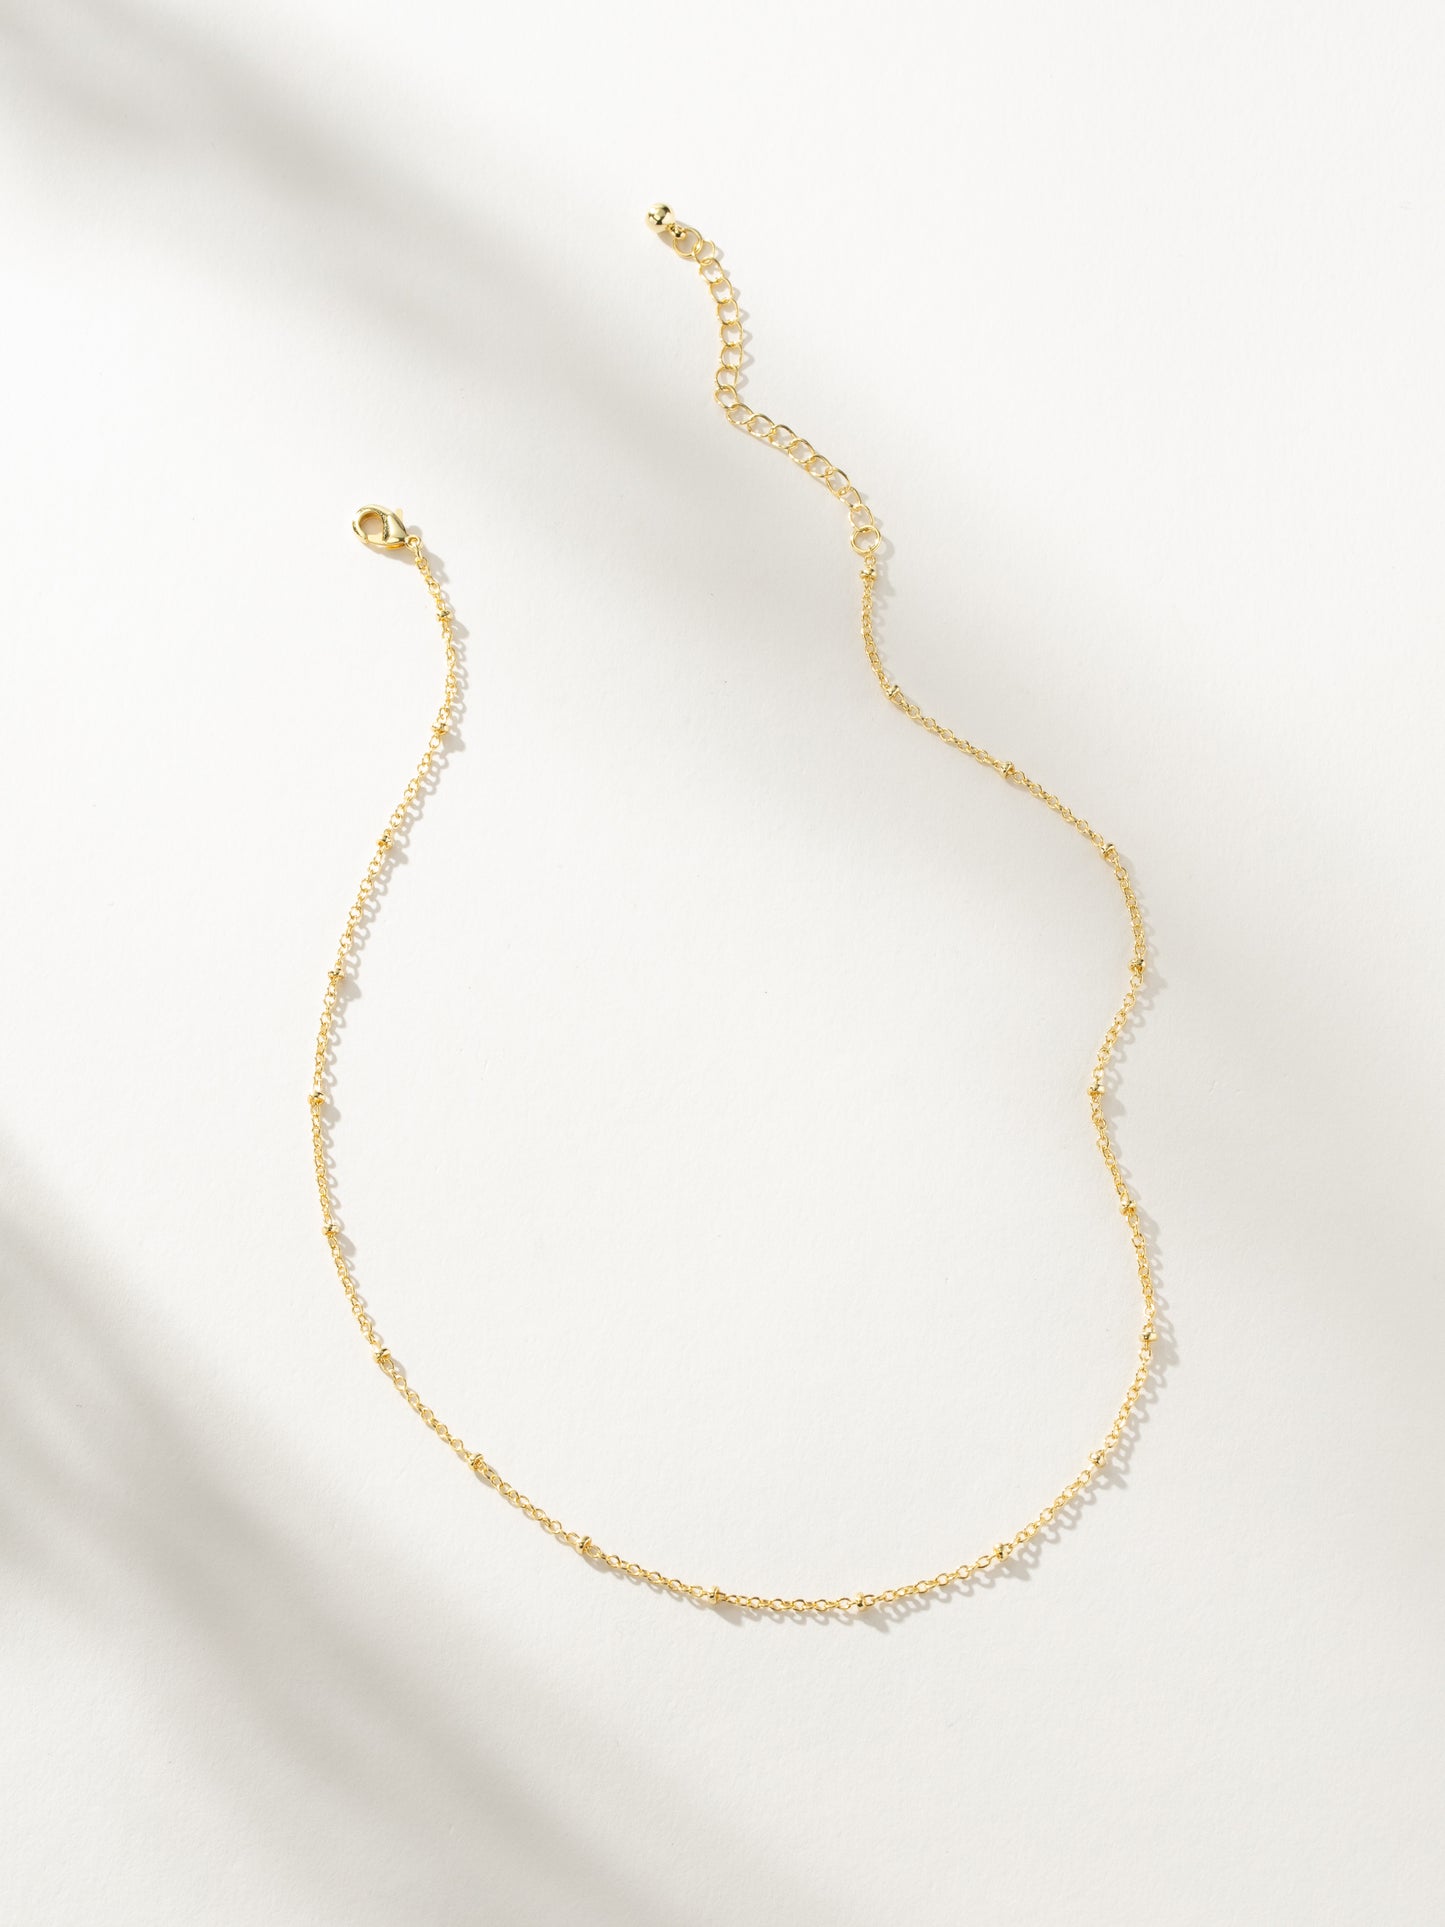 Sweet Chain Necklace | Gold | Product Image | Uncommon James